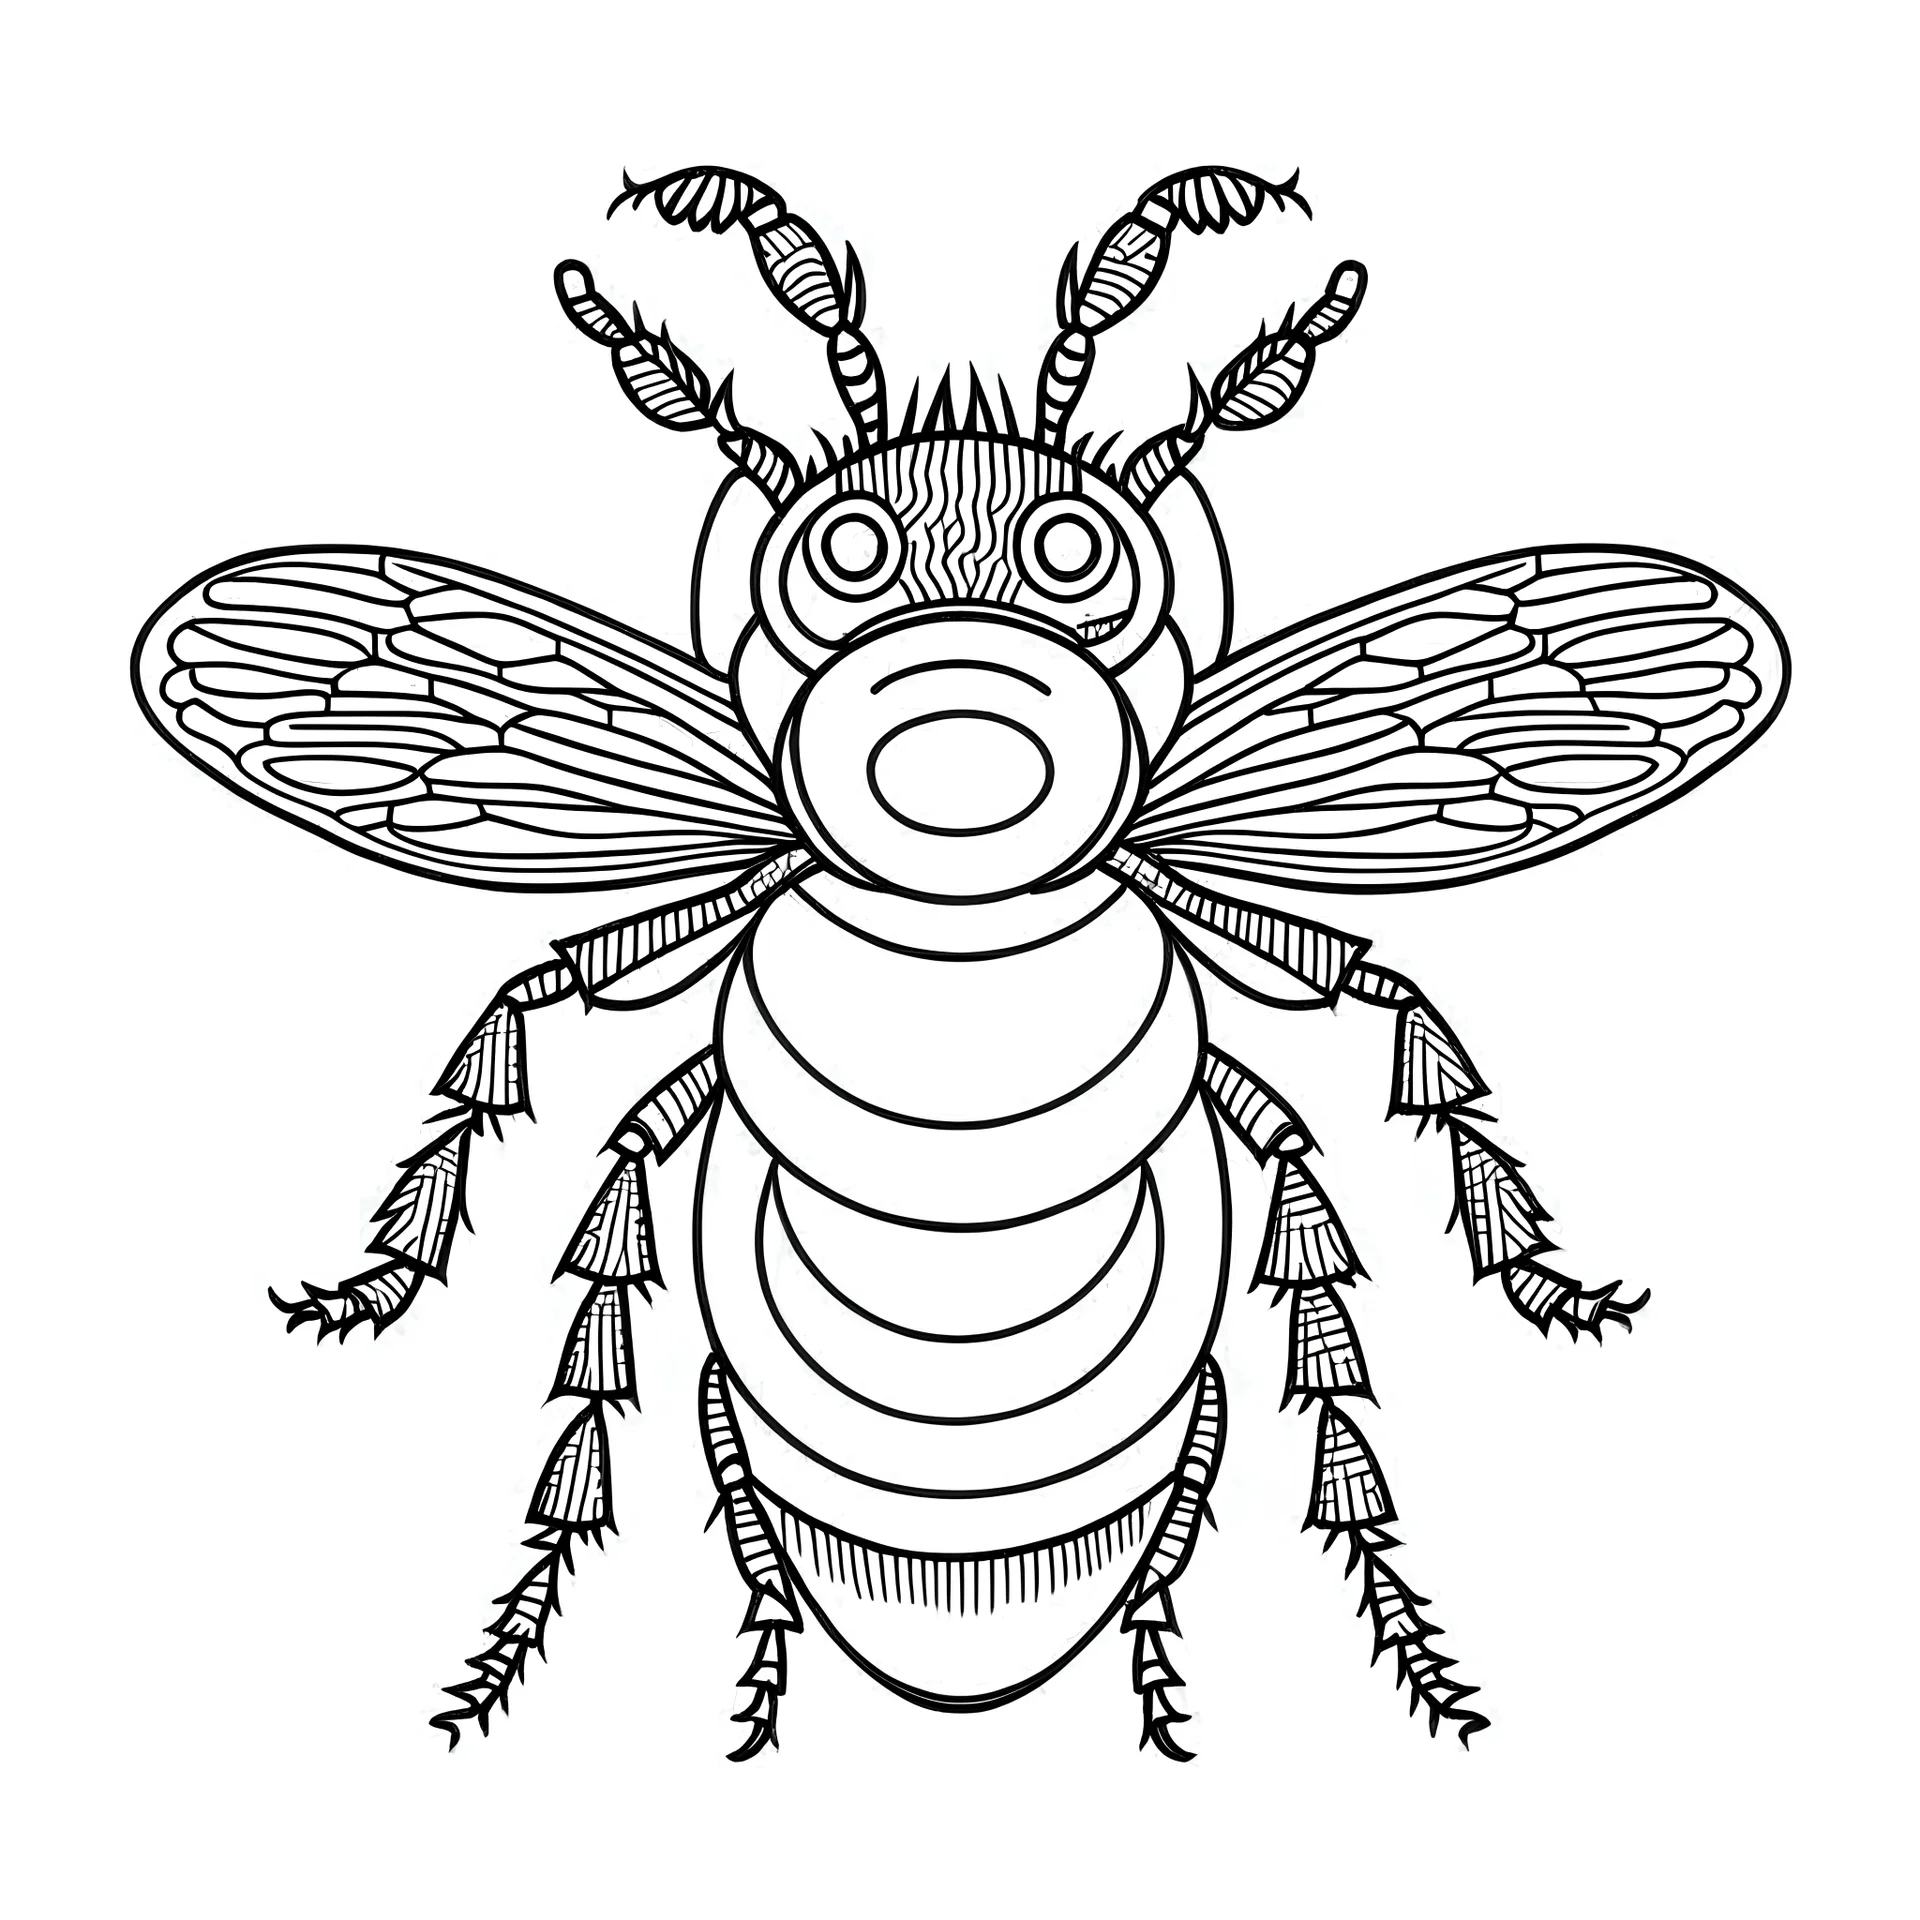 Insect coloring page for toddler